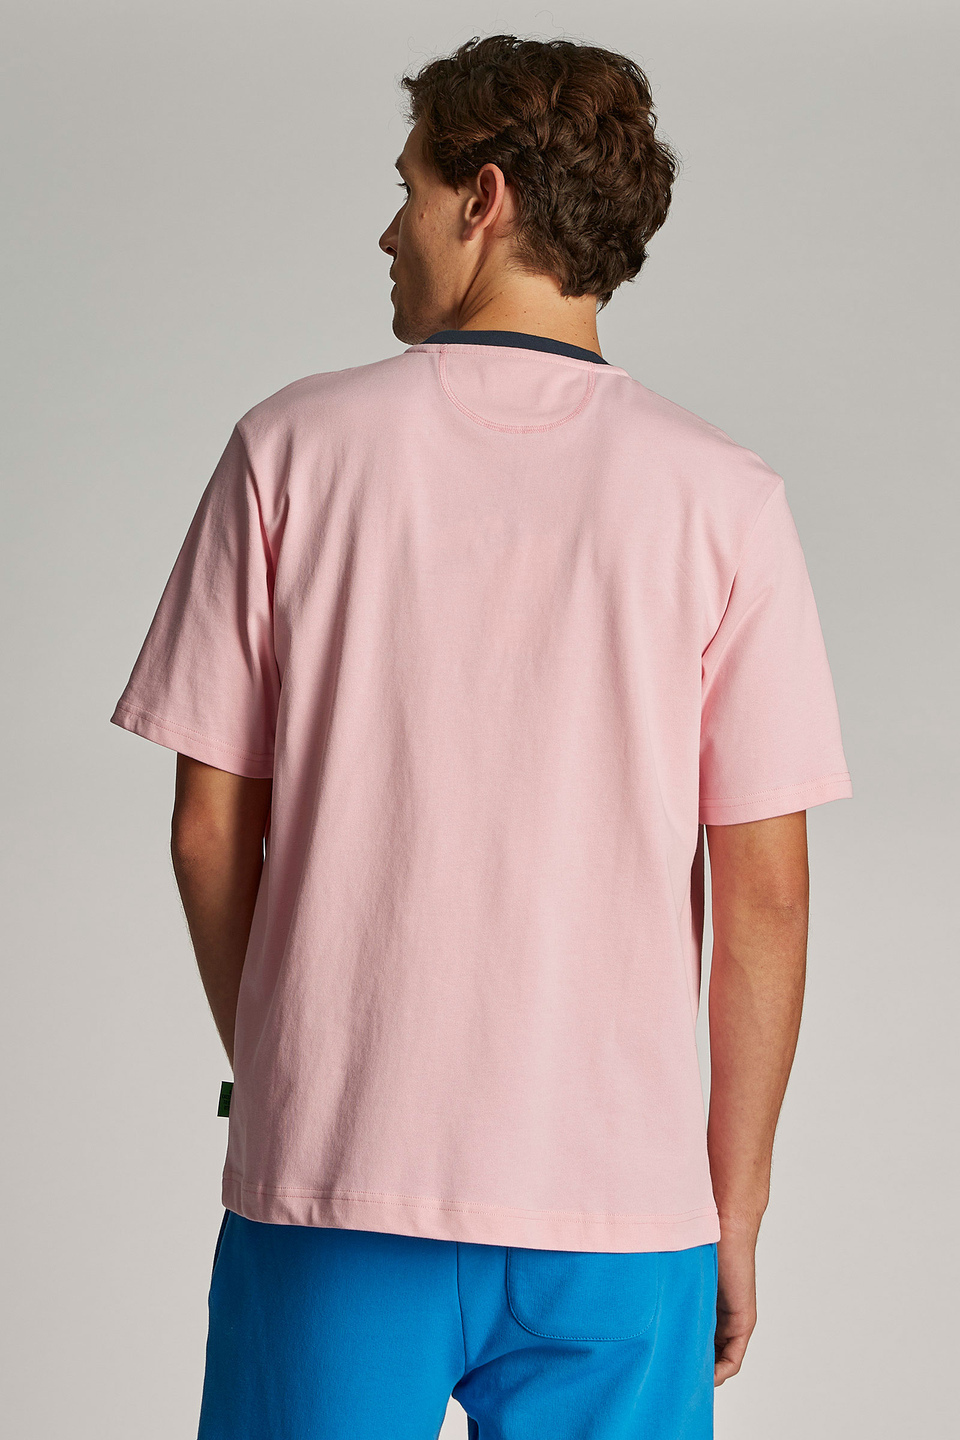 Men's oversized short-sleeved T-shirt featuring a contrasting collar | La Martina - Official Online Shop